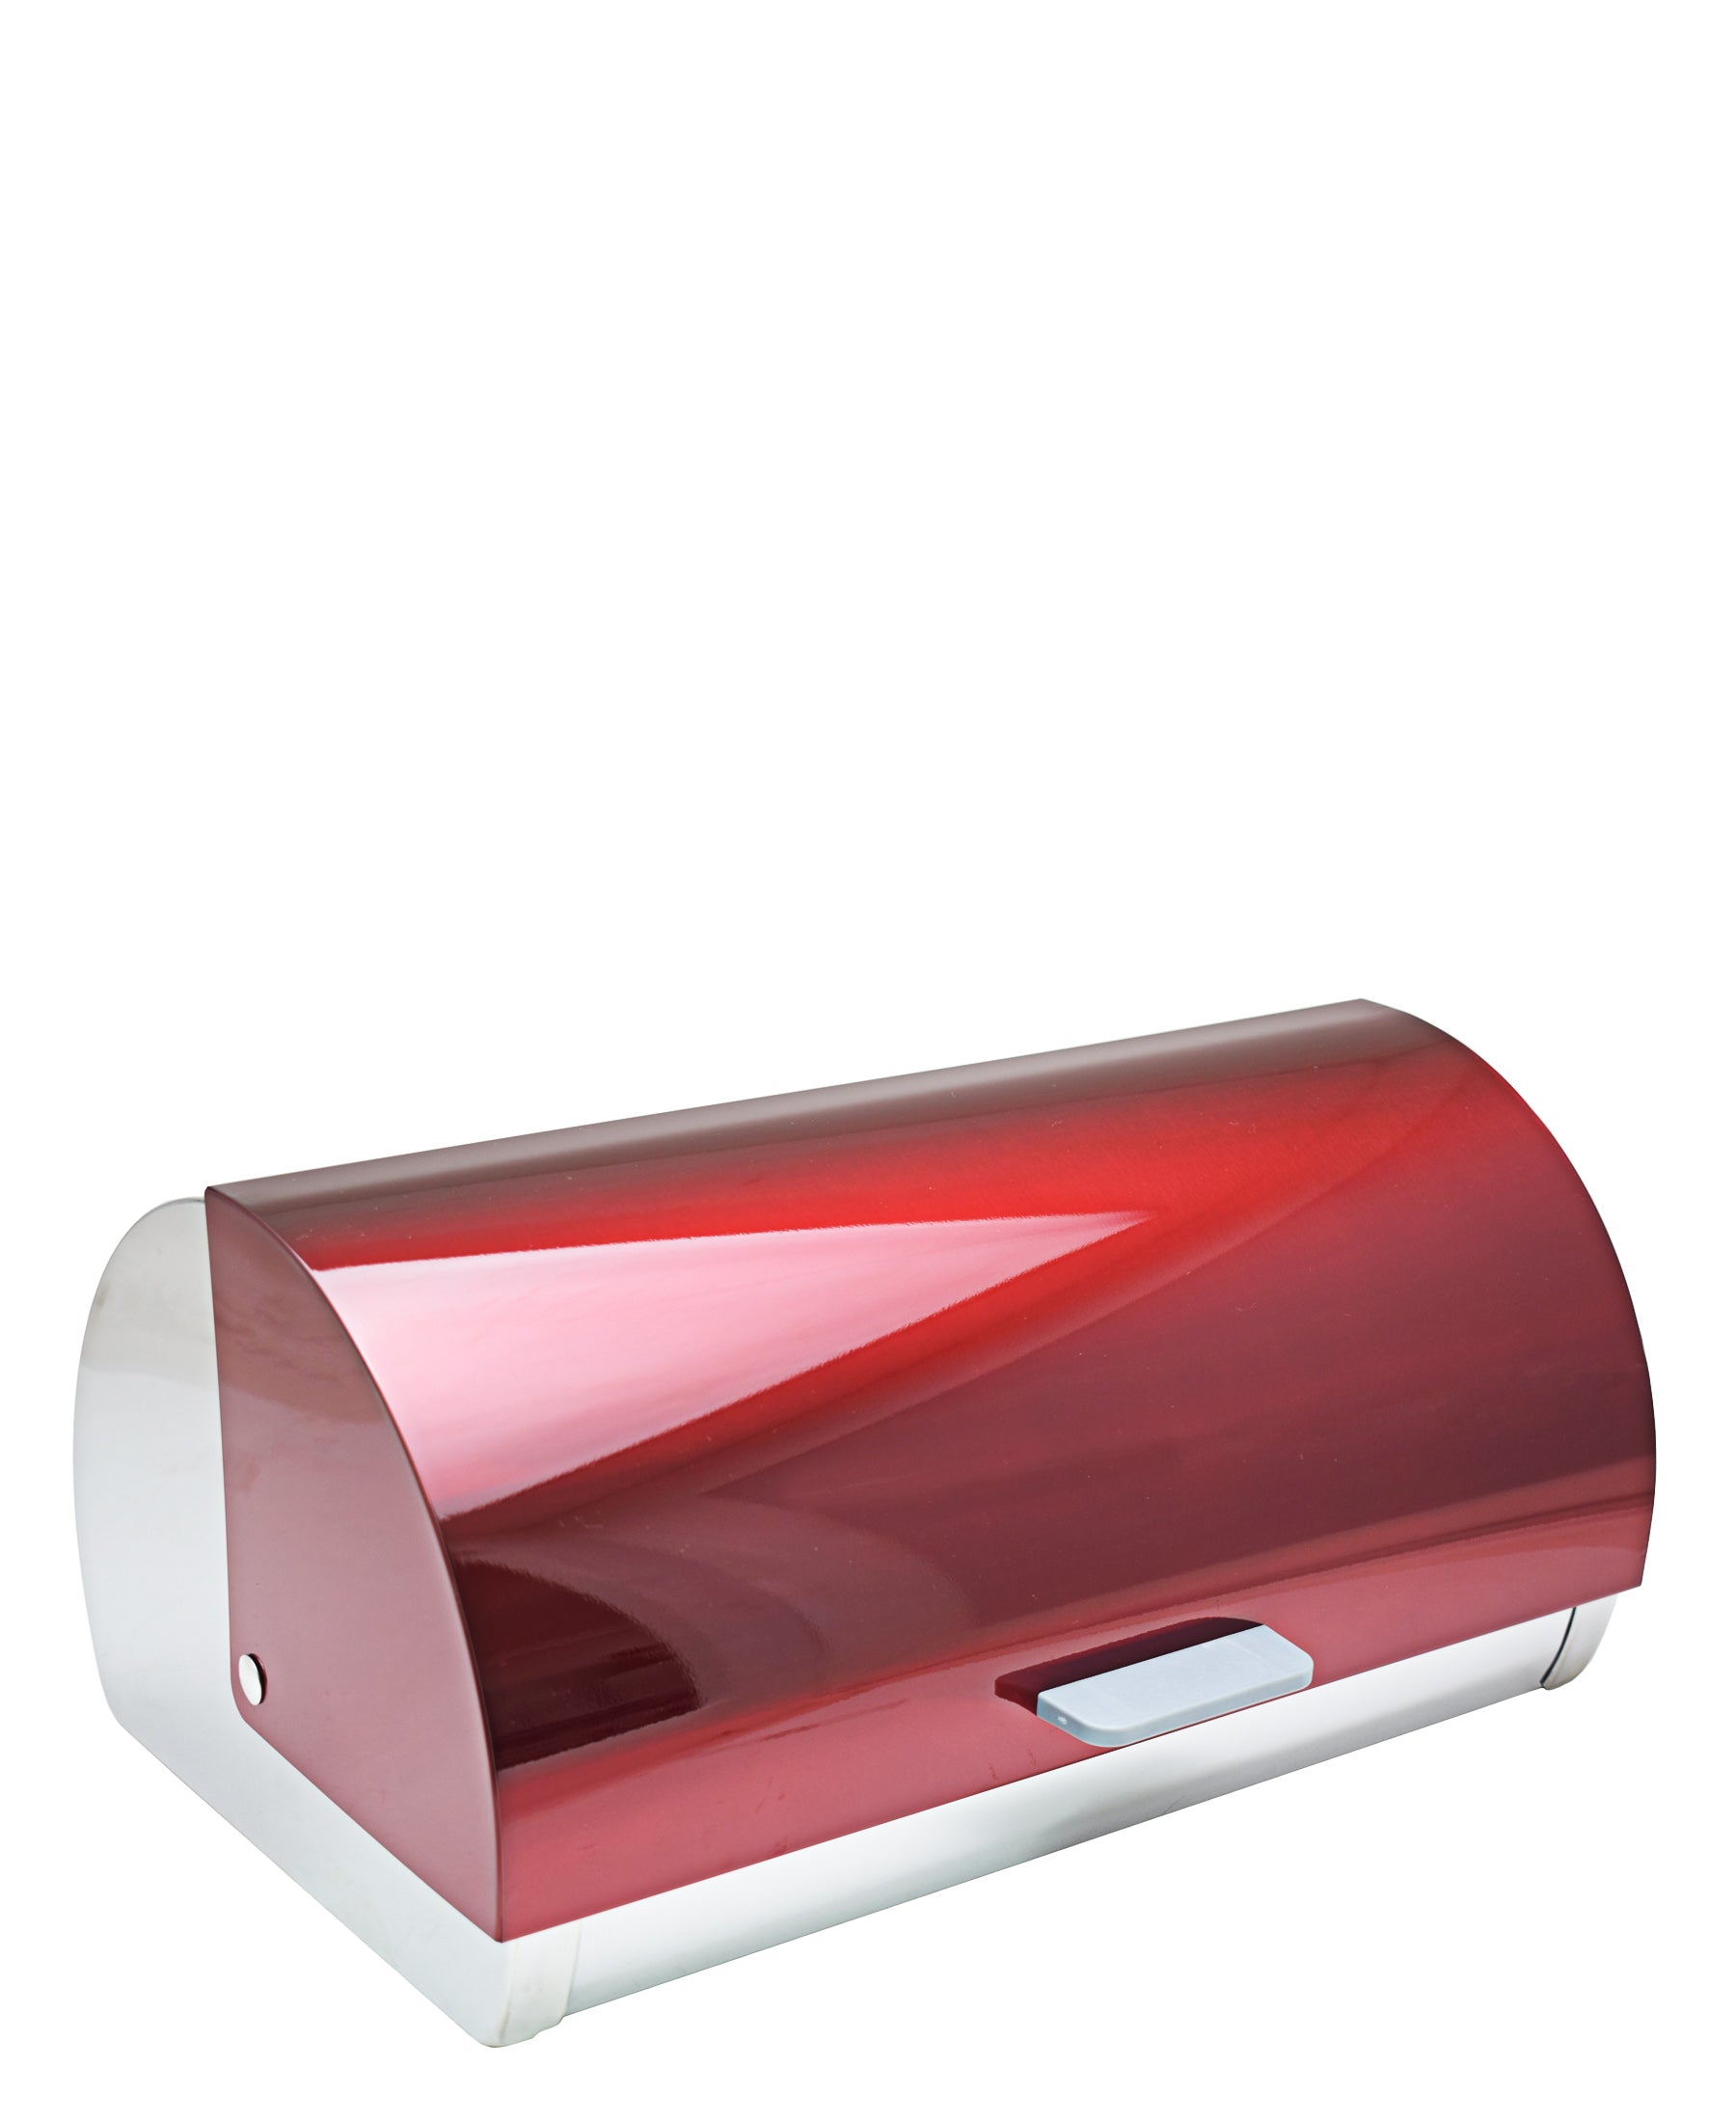 CTH Stainless Steel Bread Bin - Red